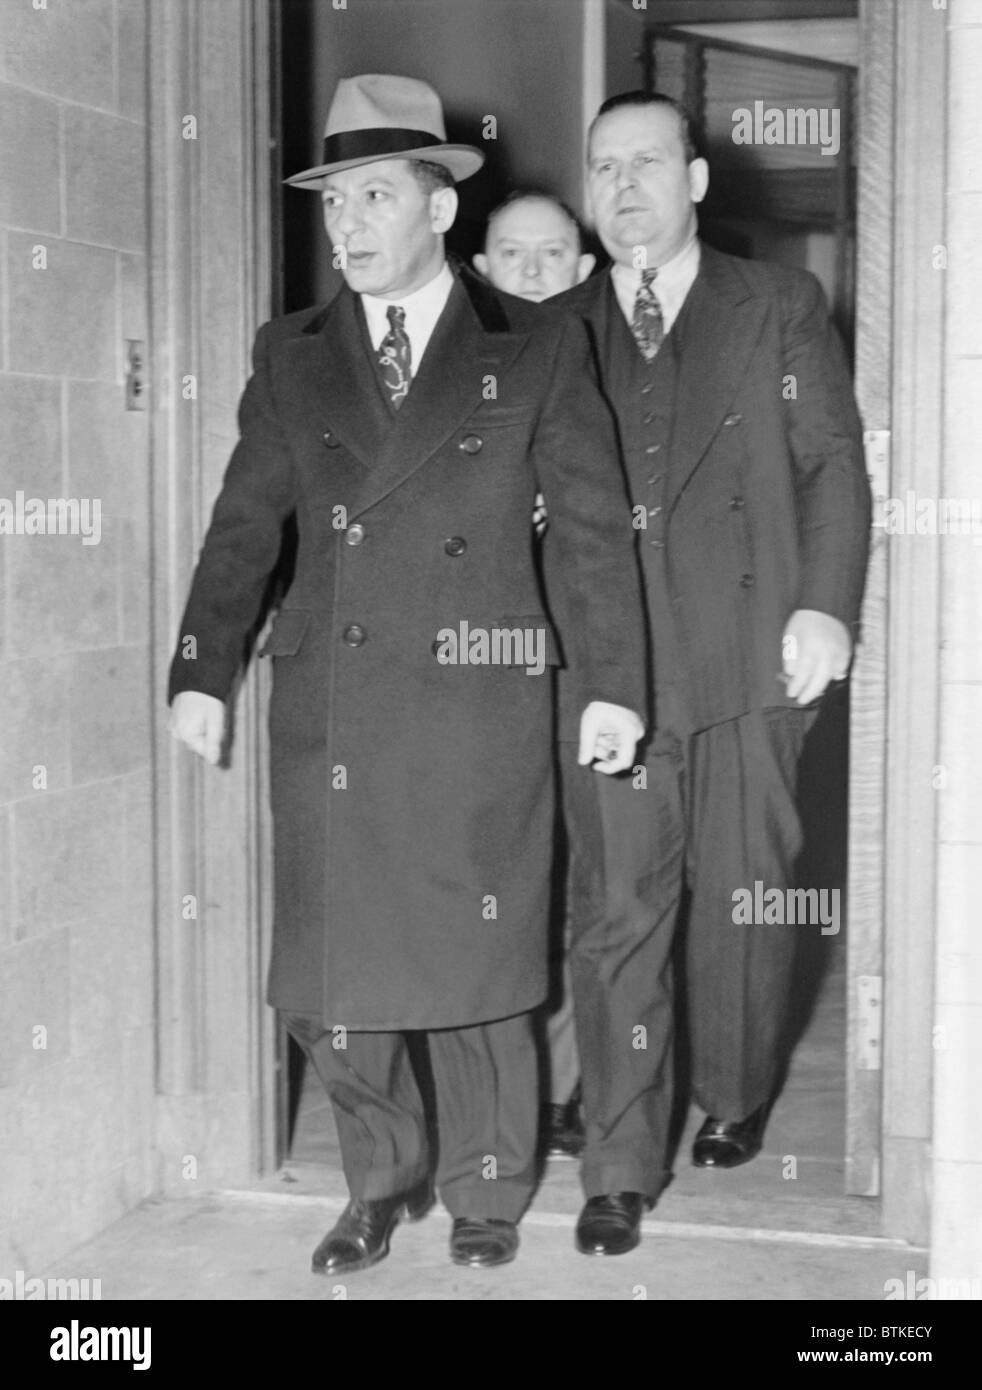 Louis 'Lepke' Buchalter (1897-1944), leaving the Federal court in New York City in December 1939. The Murder, Inc. boss was convicted of narcotics conspiracy. Future convictions for union racketeering and murder, resulted in his 1944 execution. Stock Photo